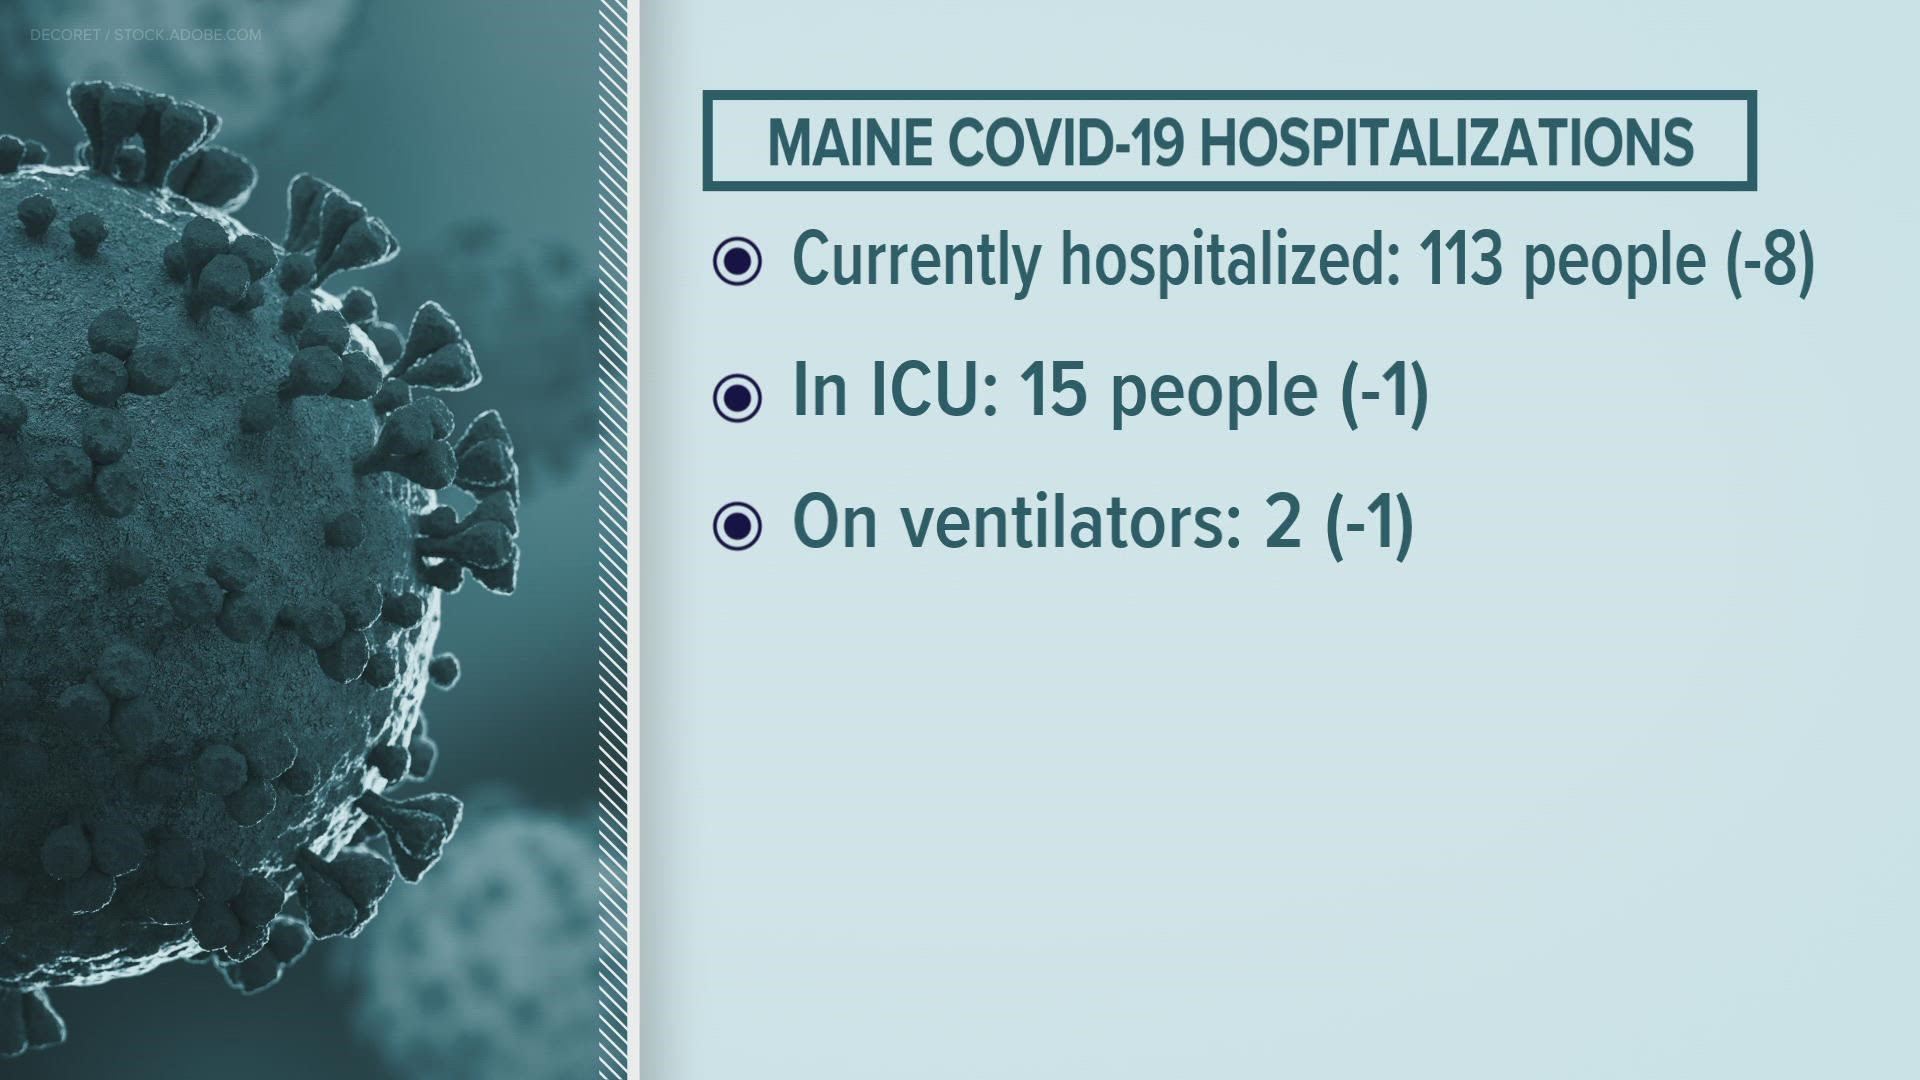 According to the Maine CDC, 113 people are currently hospitalized with COVID-19.